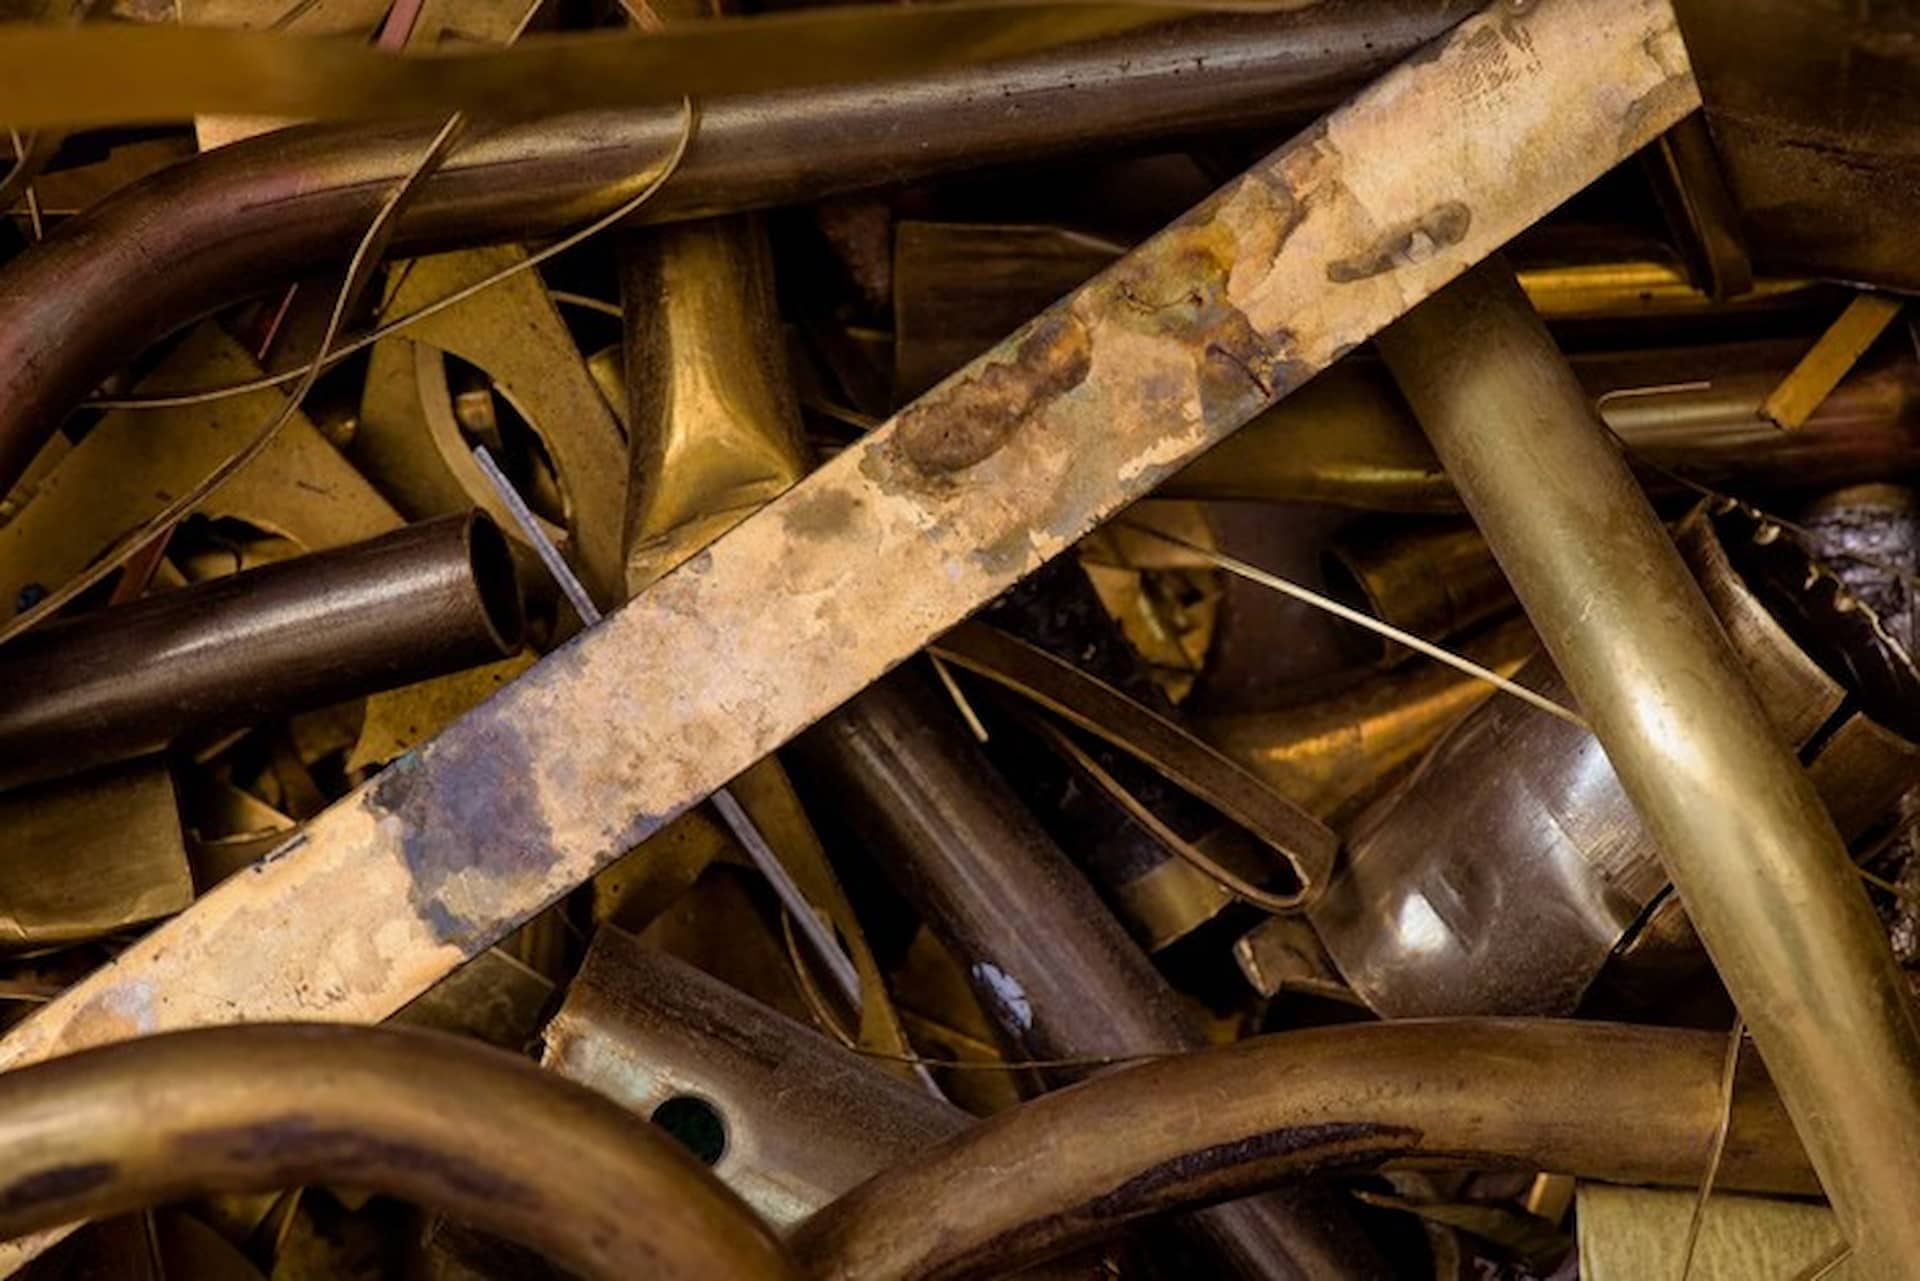 A pile of old yellow scrap brass metal pipes and miscellaneous items